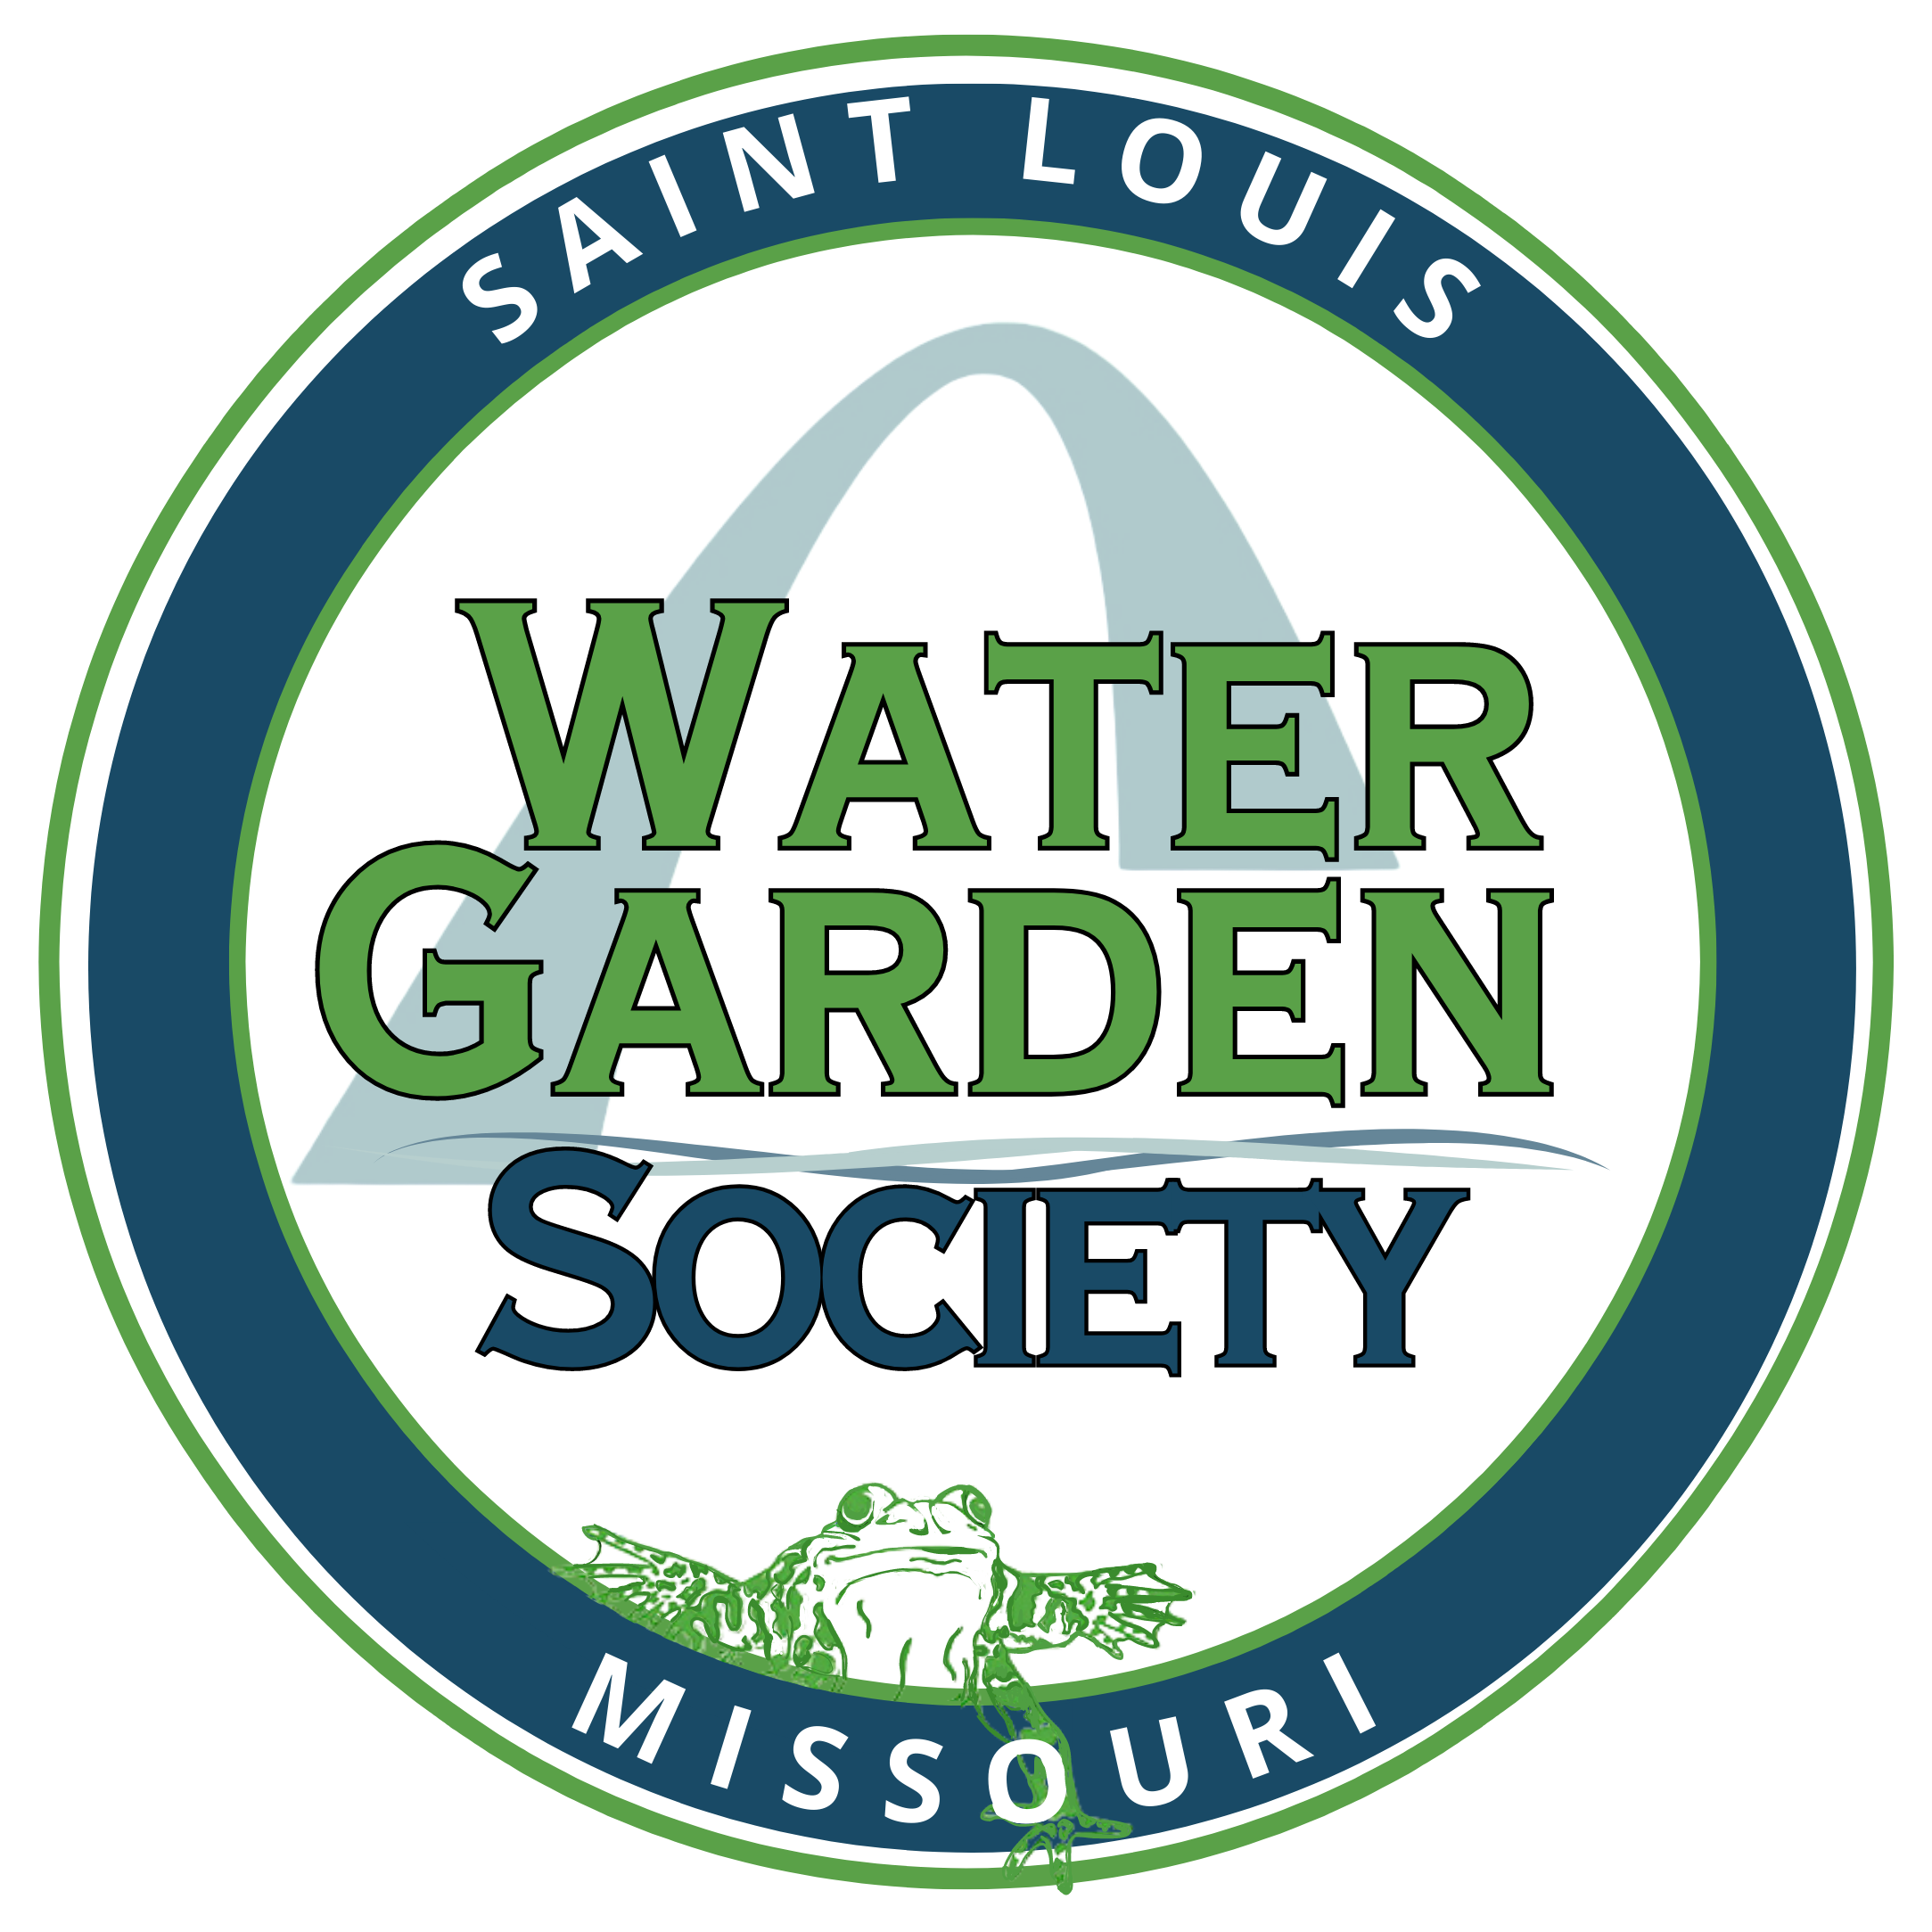 St. Louis Water Garden Society (SLWGS)